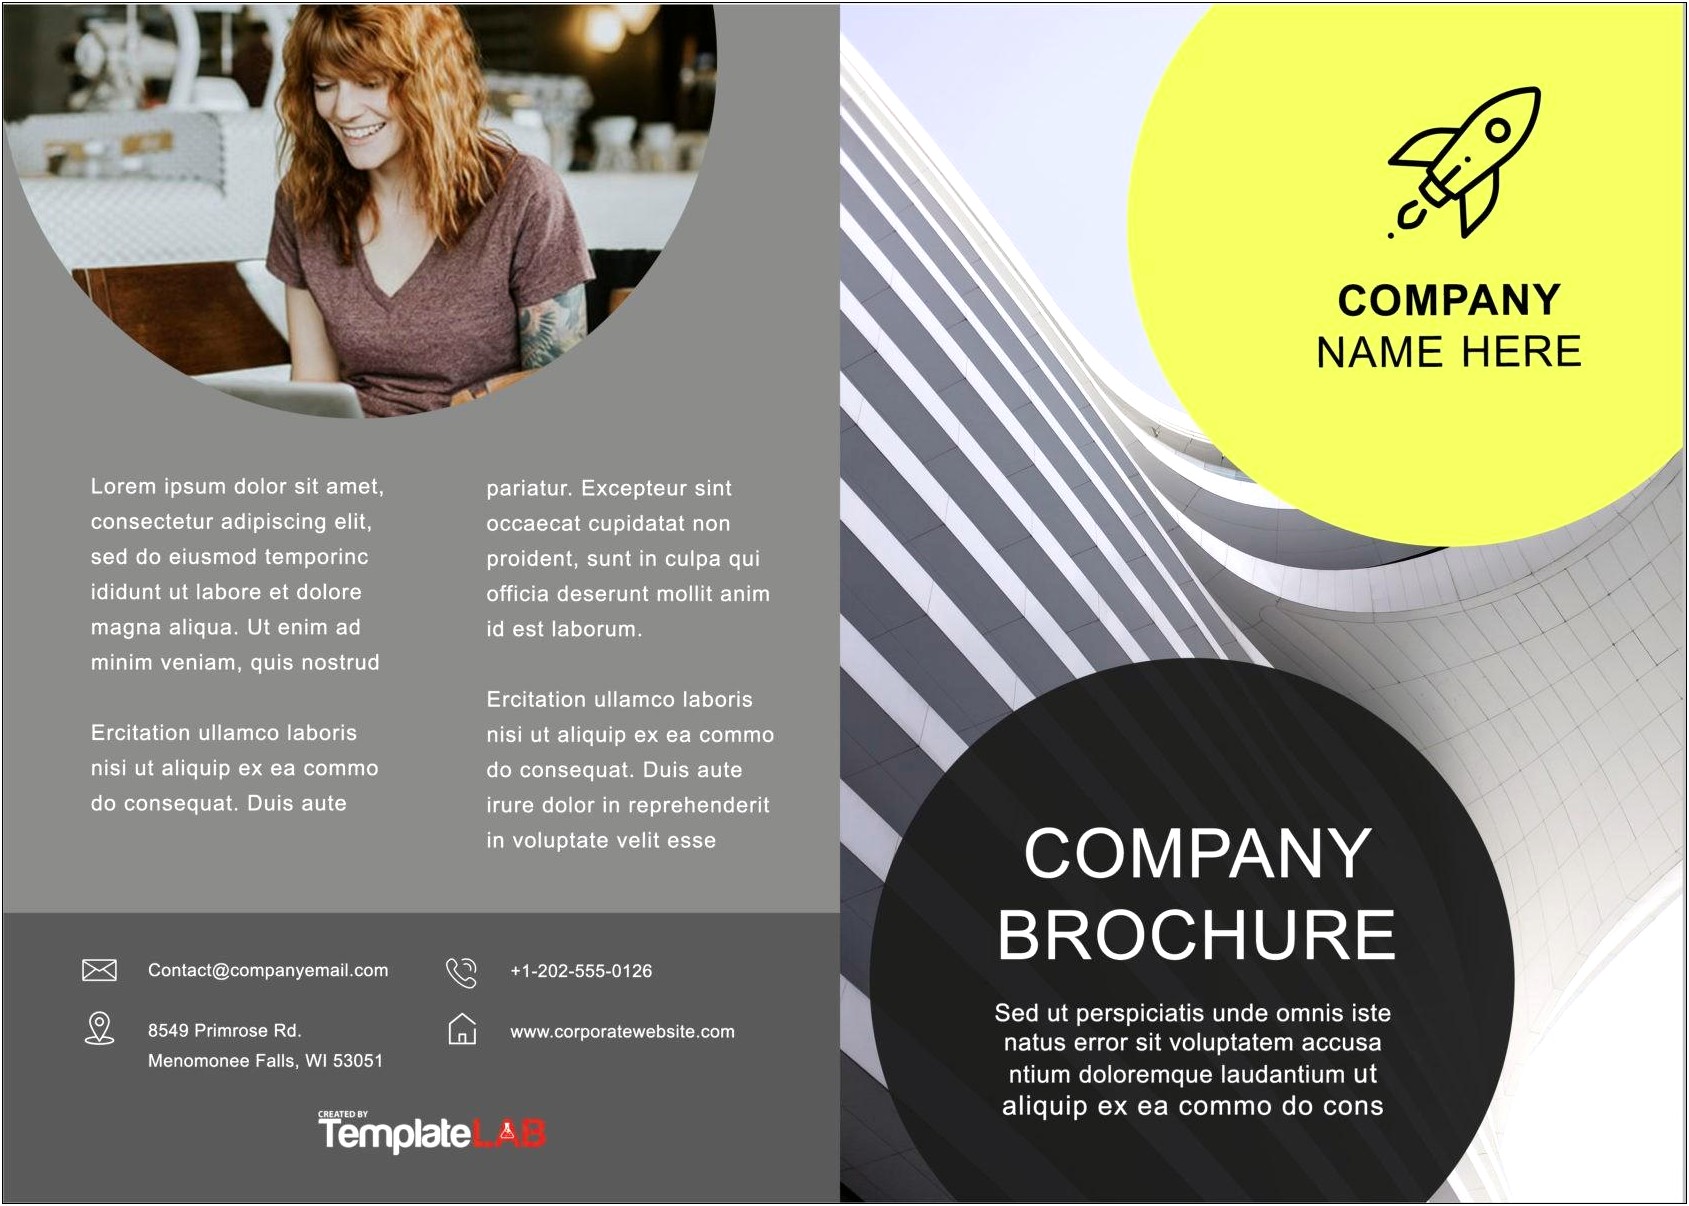 Brochure Templates Free Download For Publisher